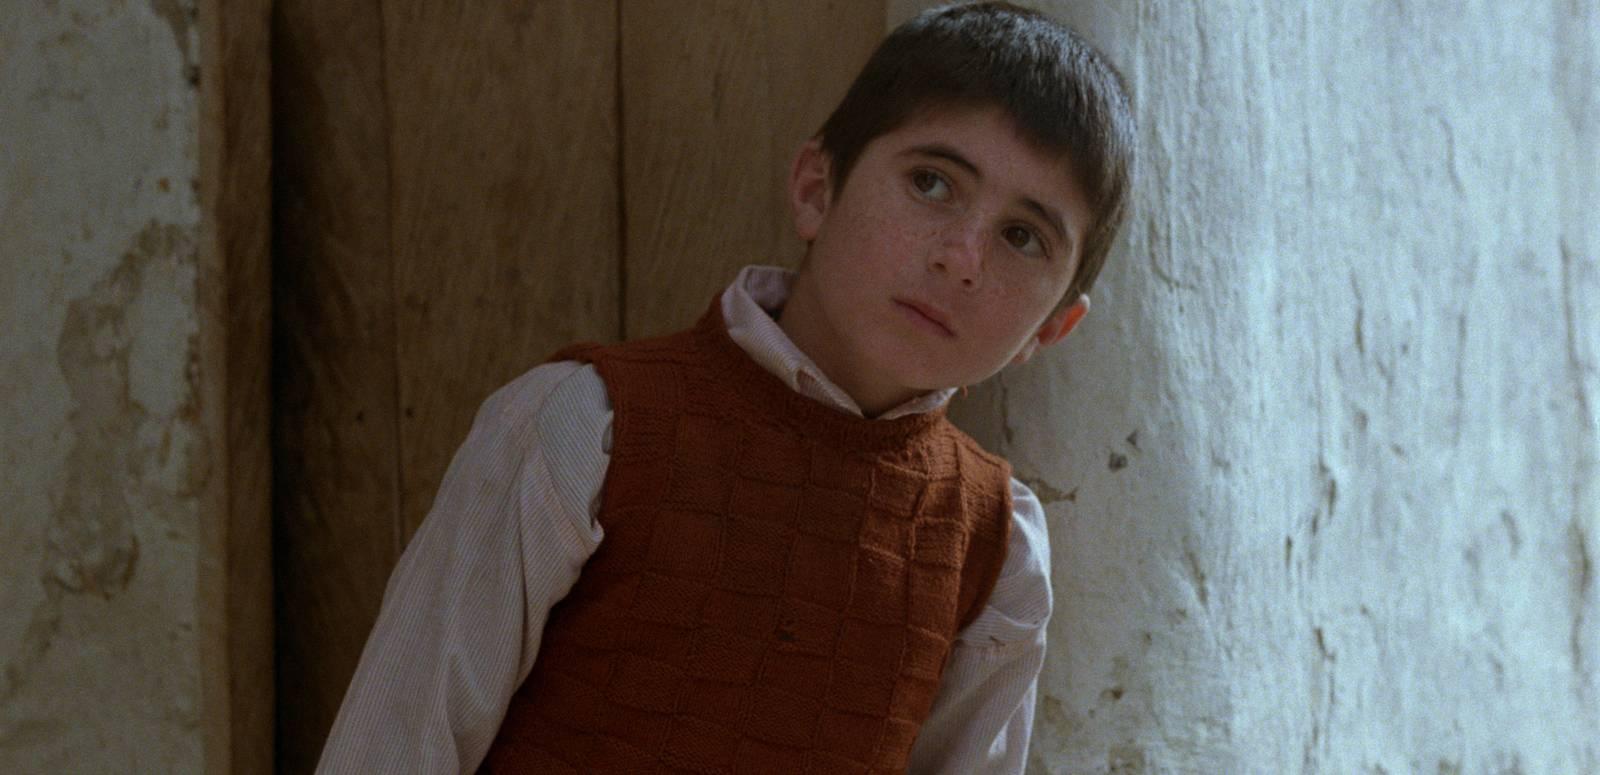 A young boy in collared shirt and vest stands in front of a closed wooden door, looking quizzical